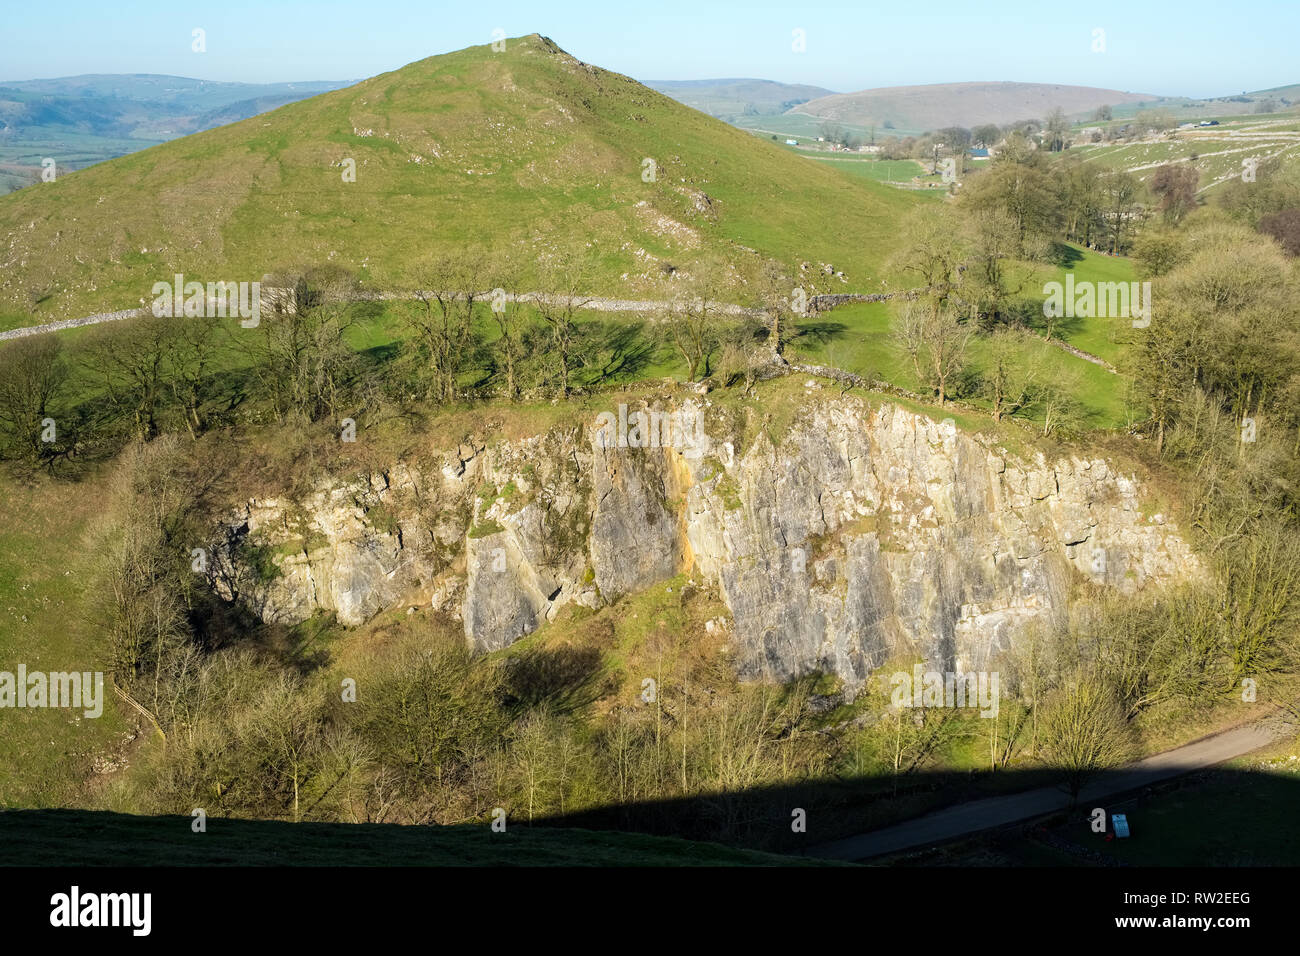 Aldery Cliff a limestone climbing crag in the Peak District National Park Stock Photo